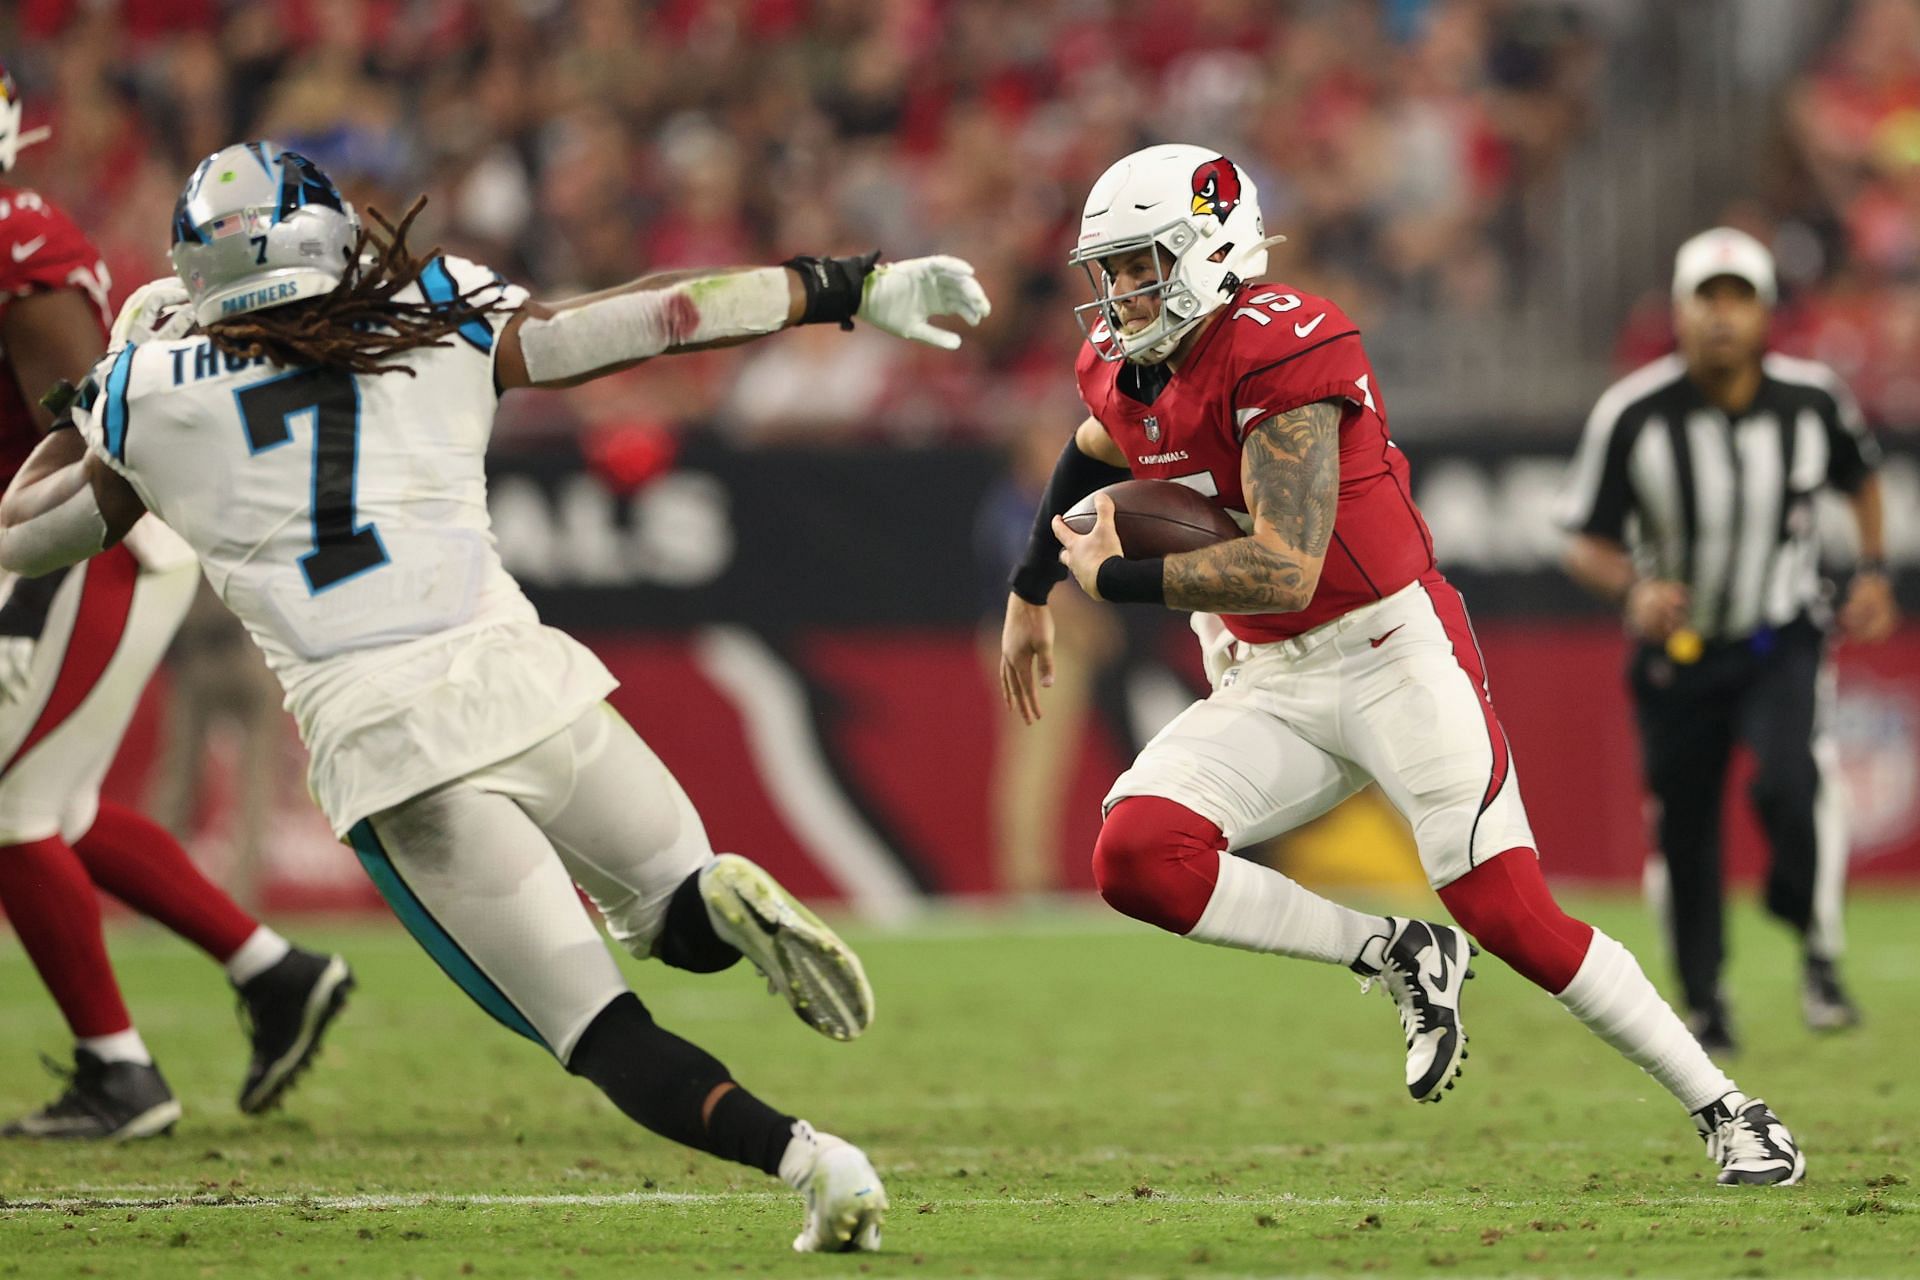 Cardinals vs. Panthers Week 4 preview and prediction